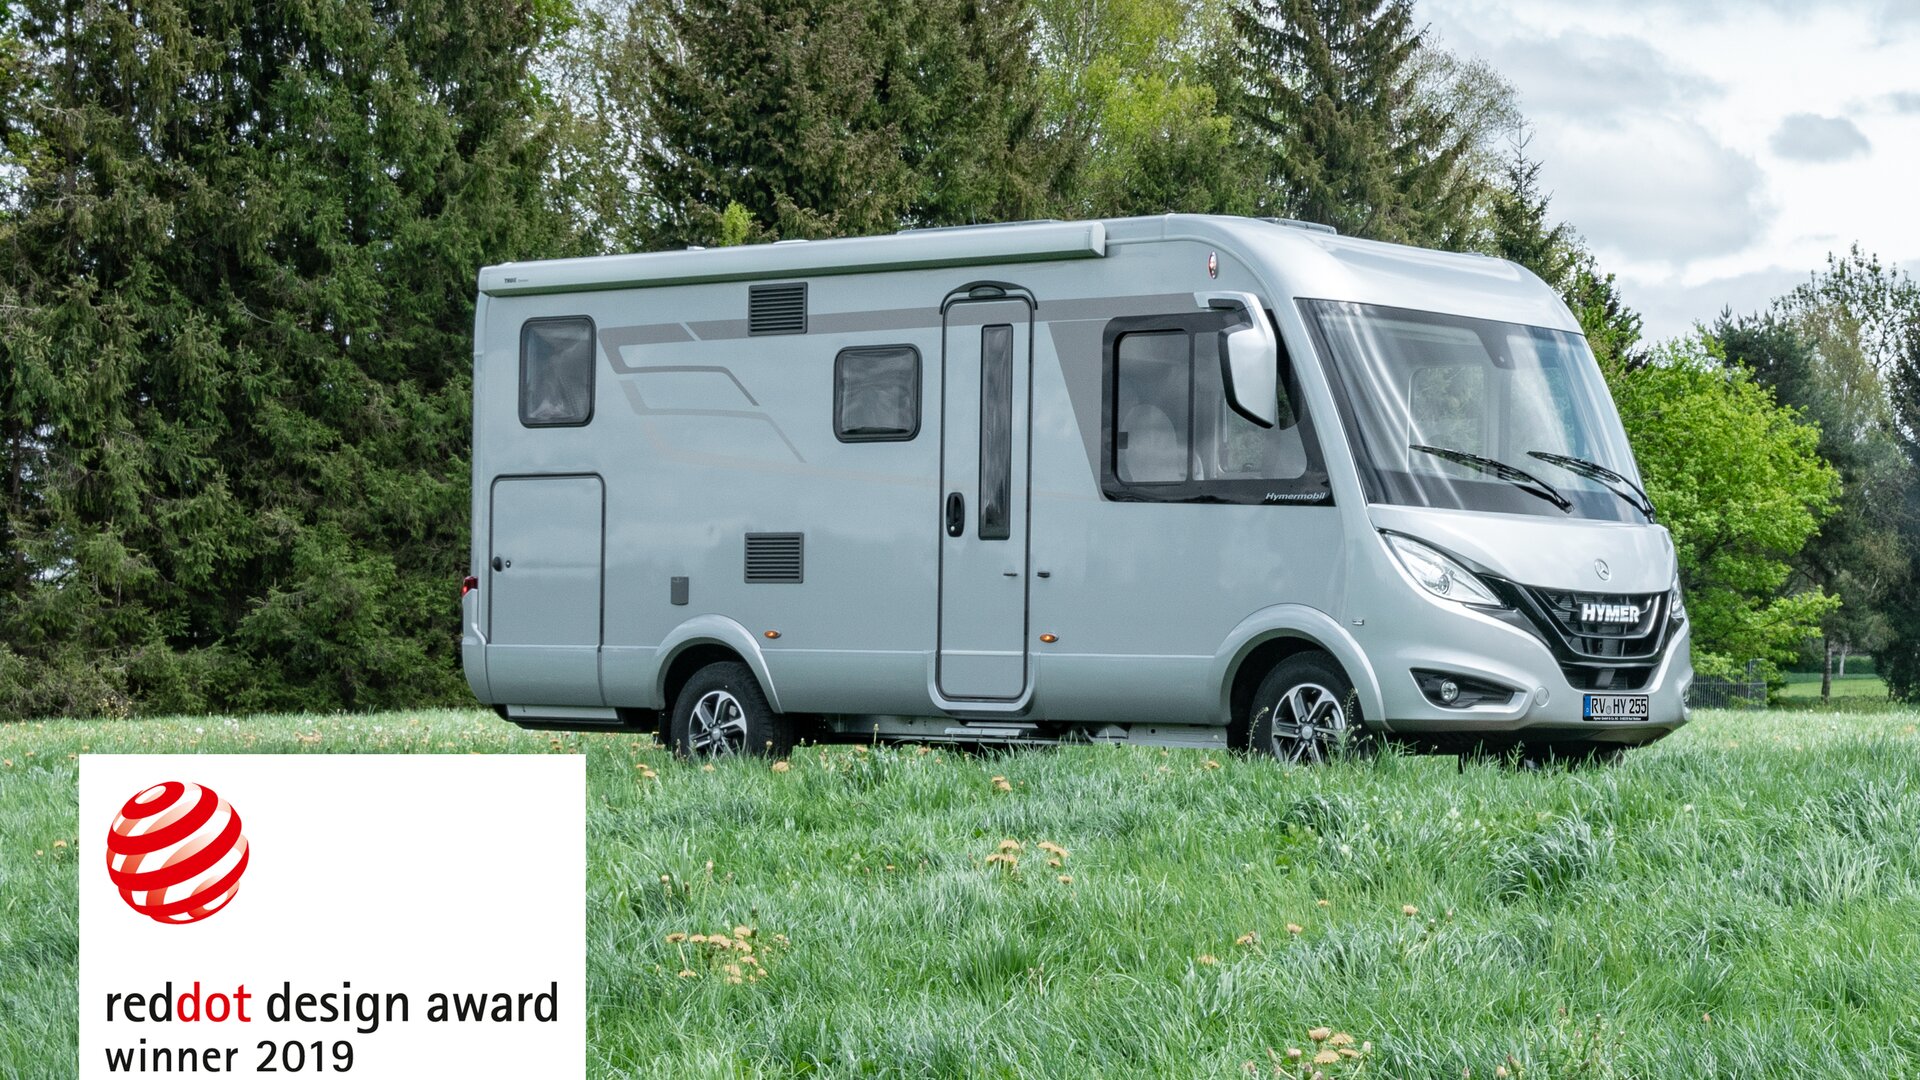 HYMER B-MC I WhiteLine standing on a meadow with trees in the background and emblem Reddot Design Award Winner 2019